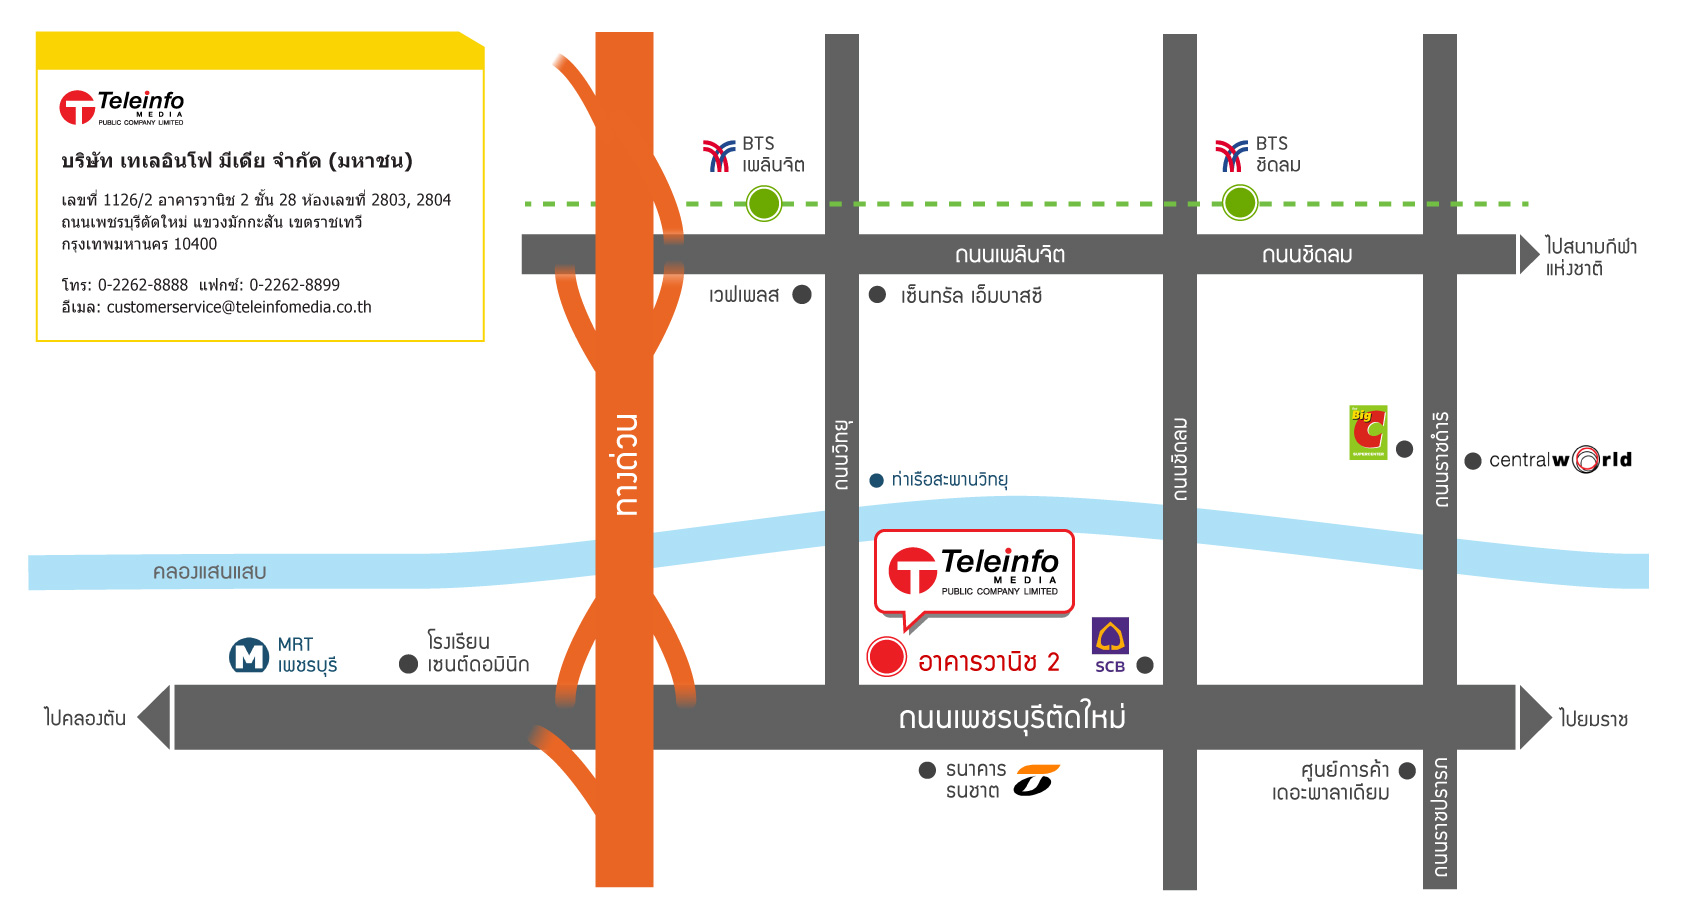 Teleinfo Media Public Company Limited Map01 Vanit - TH